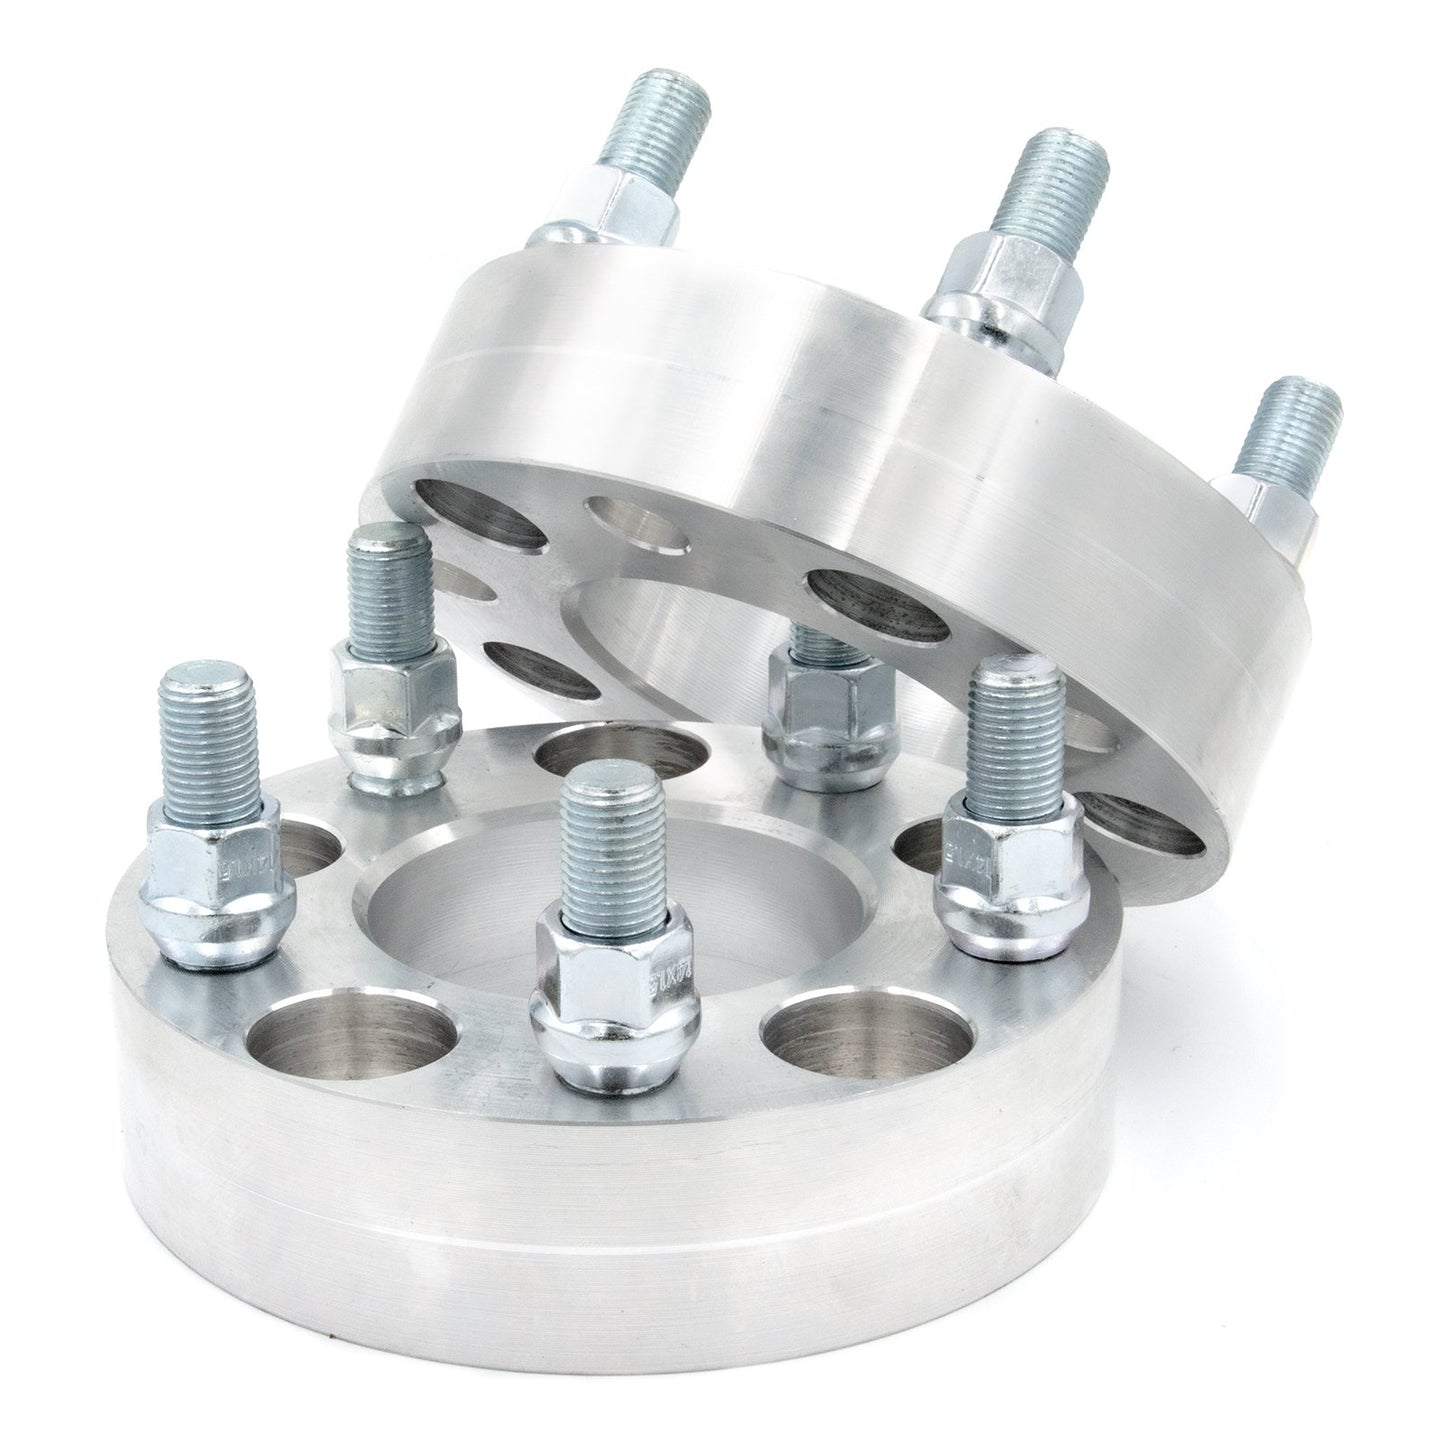 5x98 to 5x112 Wheel Spacer/Adapter - Thickness: 3/4"- 4"